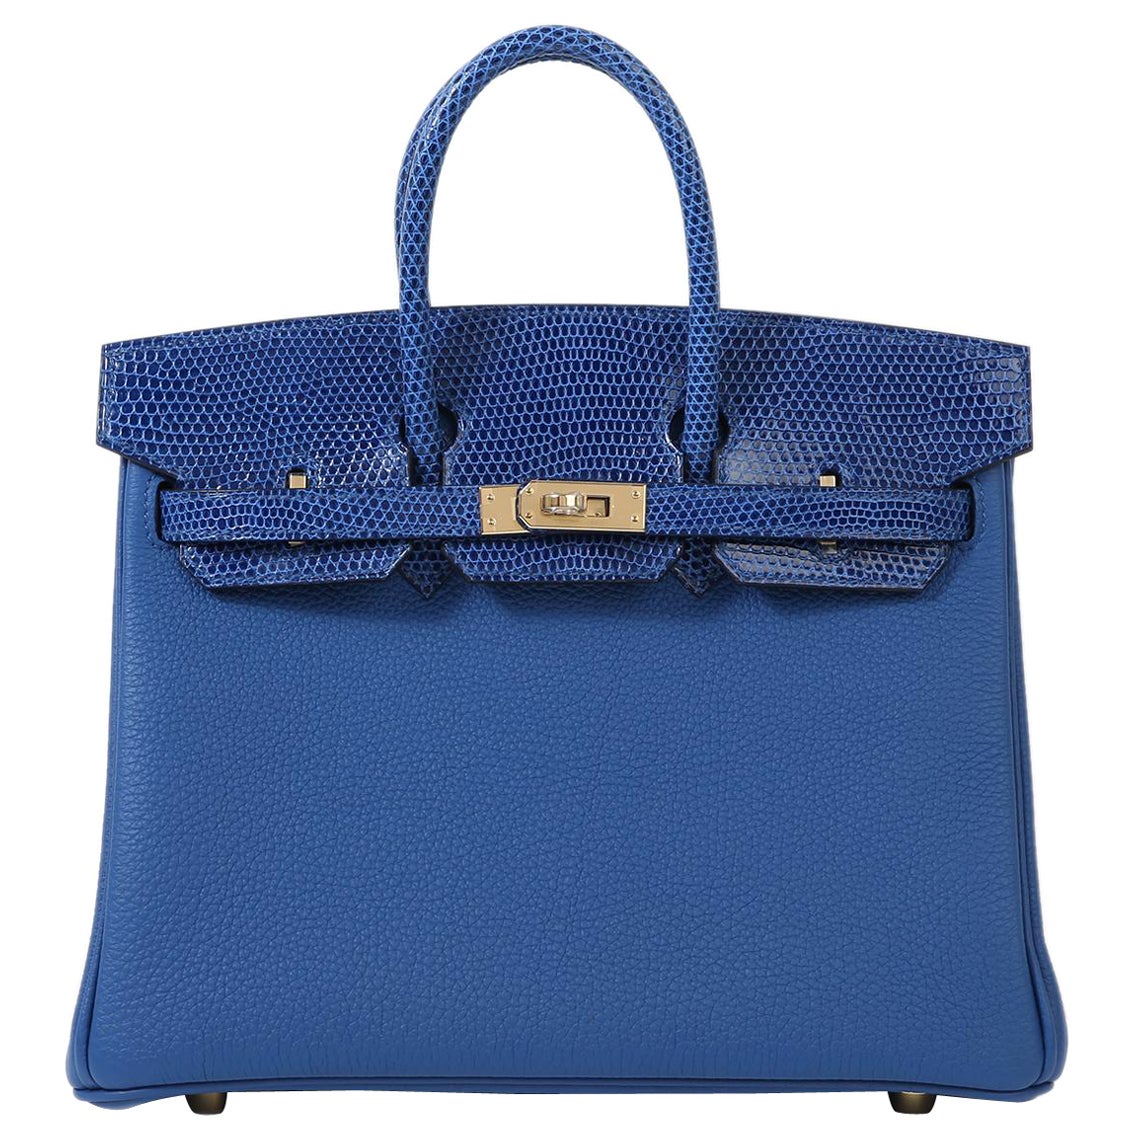 HERMÈS NEW Birkin 25 Touch Blue Lizard Exotic Togo Leather Top Handle Tote Bag